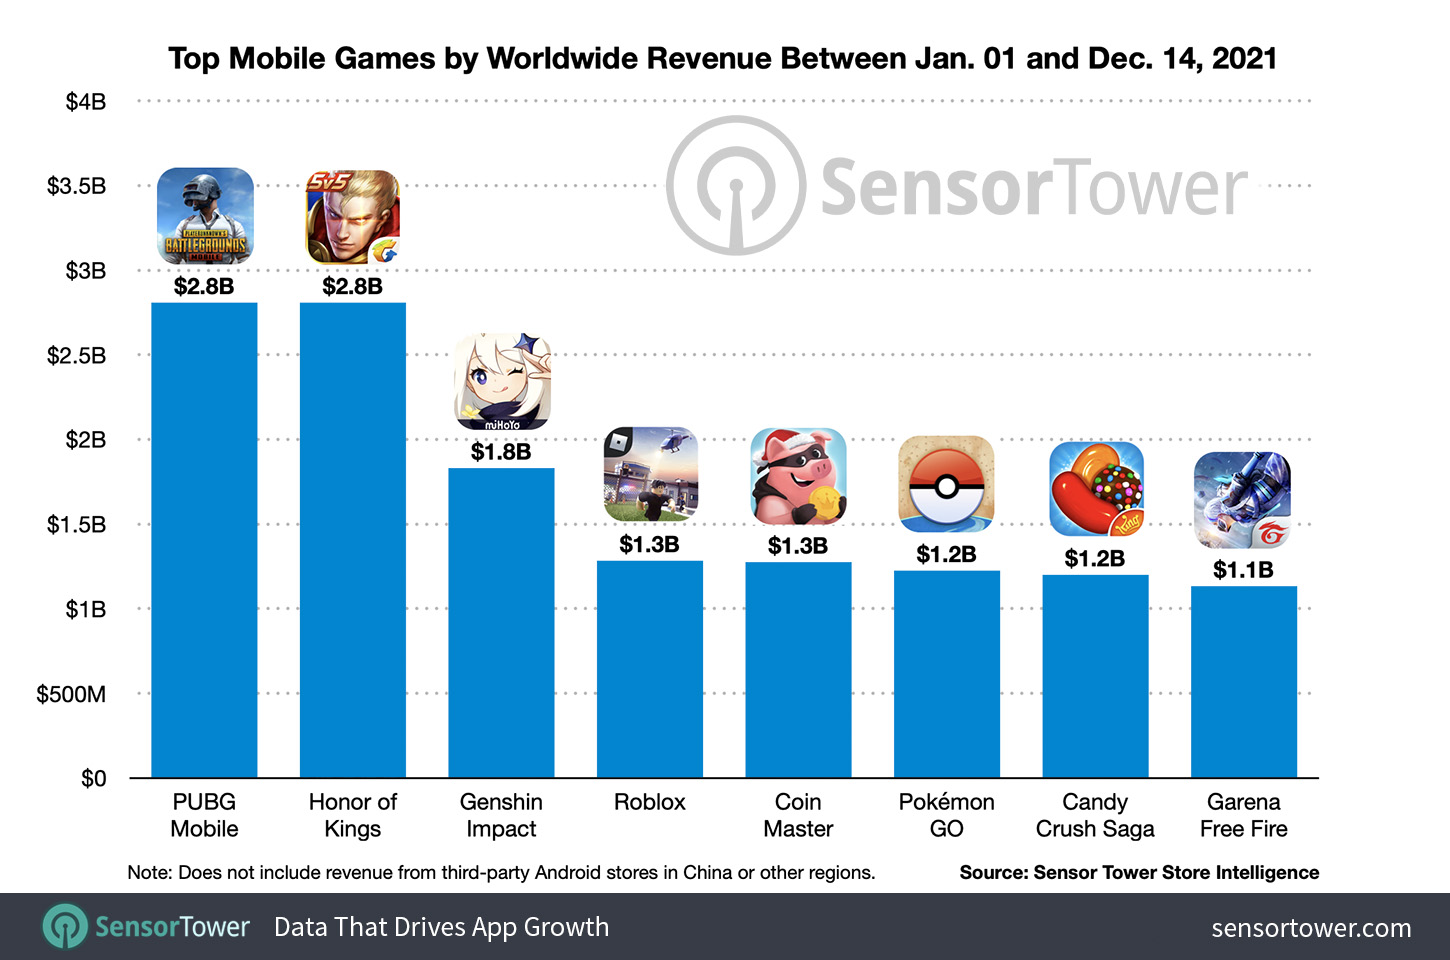 Top Mobile Games by Worldwide Revenue Between January 1 and December 14 2021